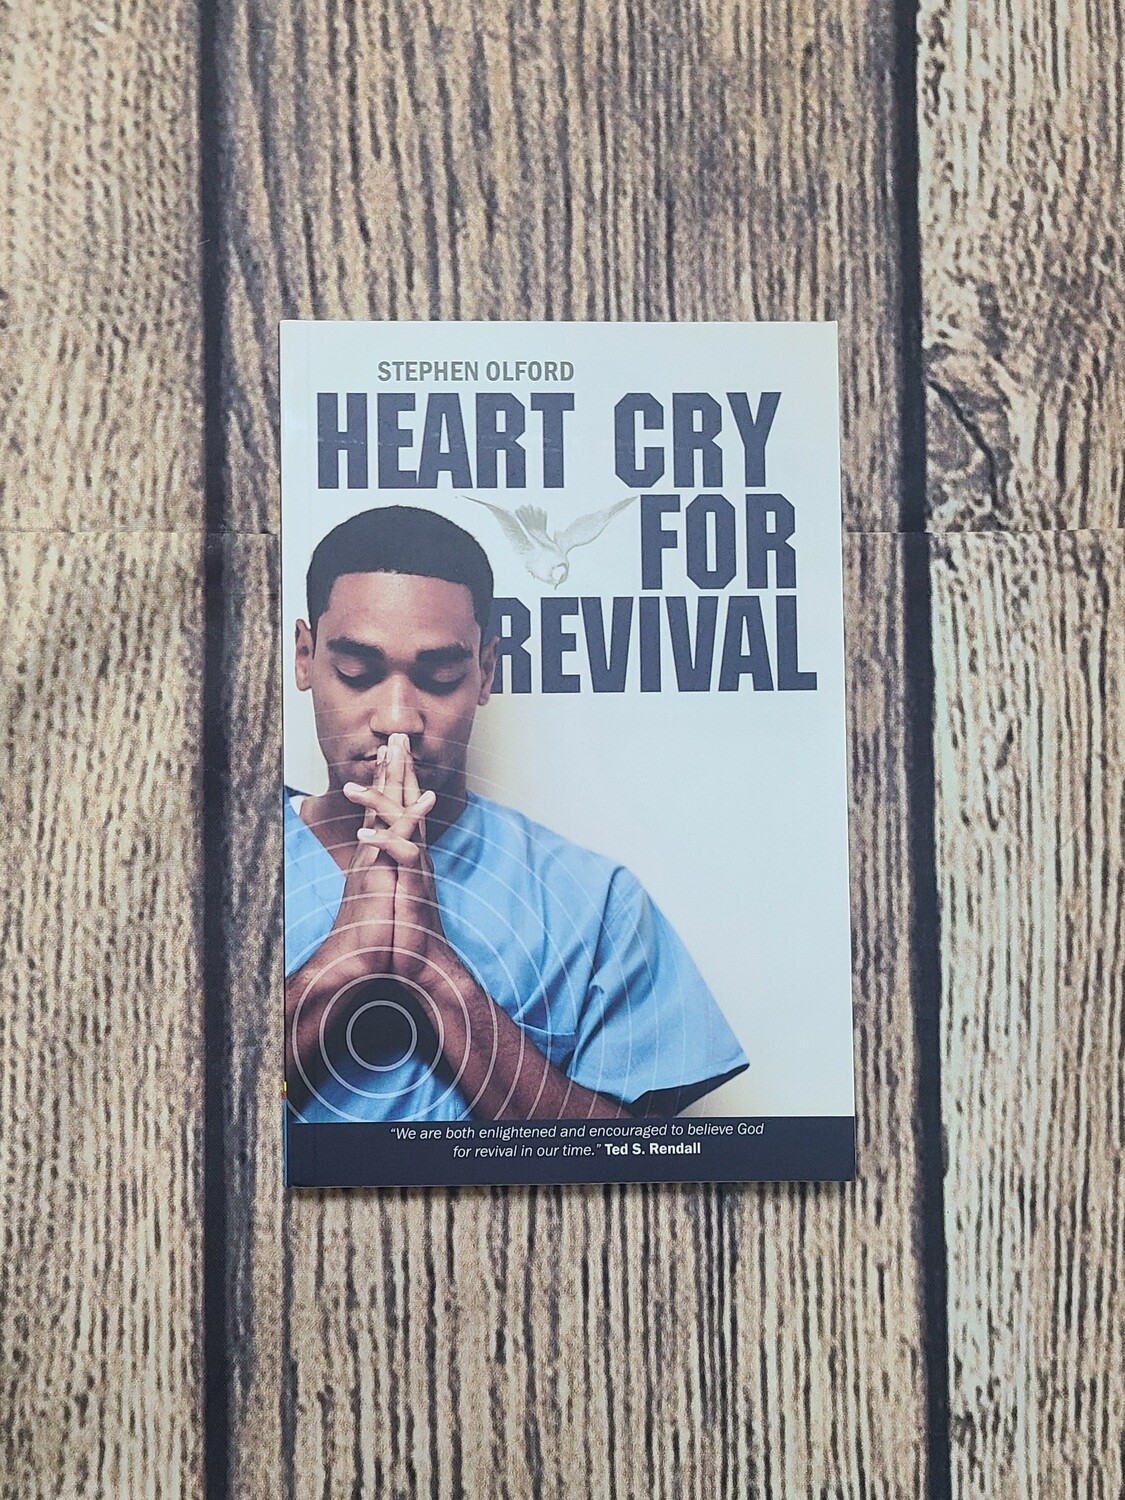 Heart Cry for Revival by Stephen Olford